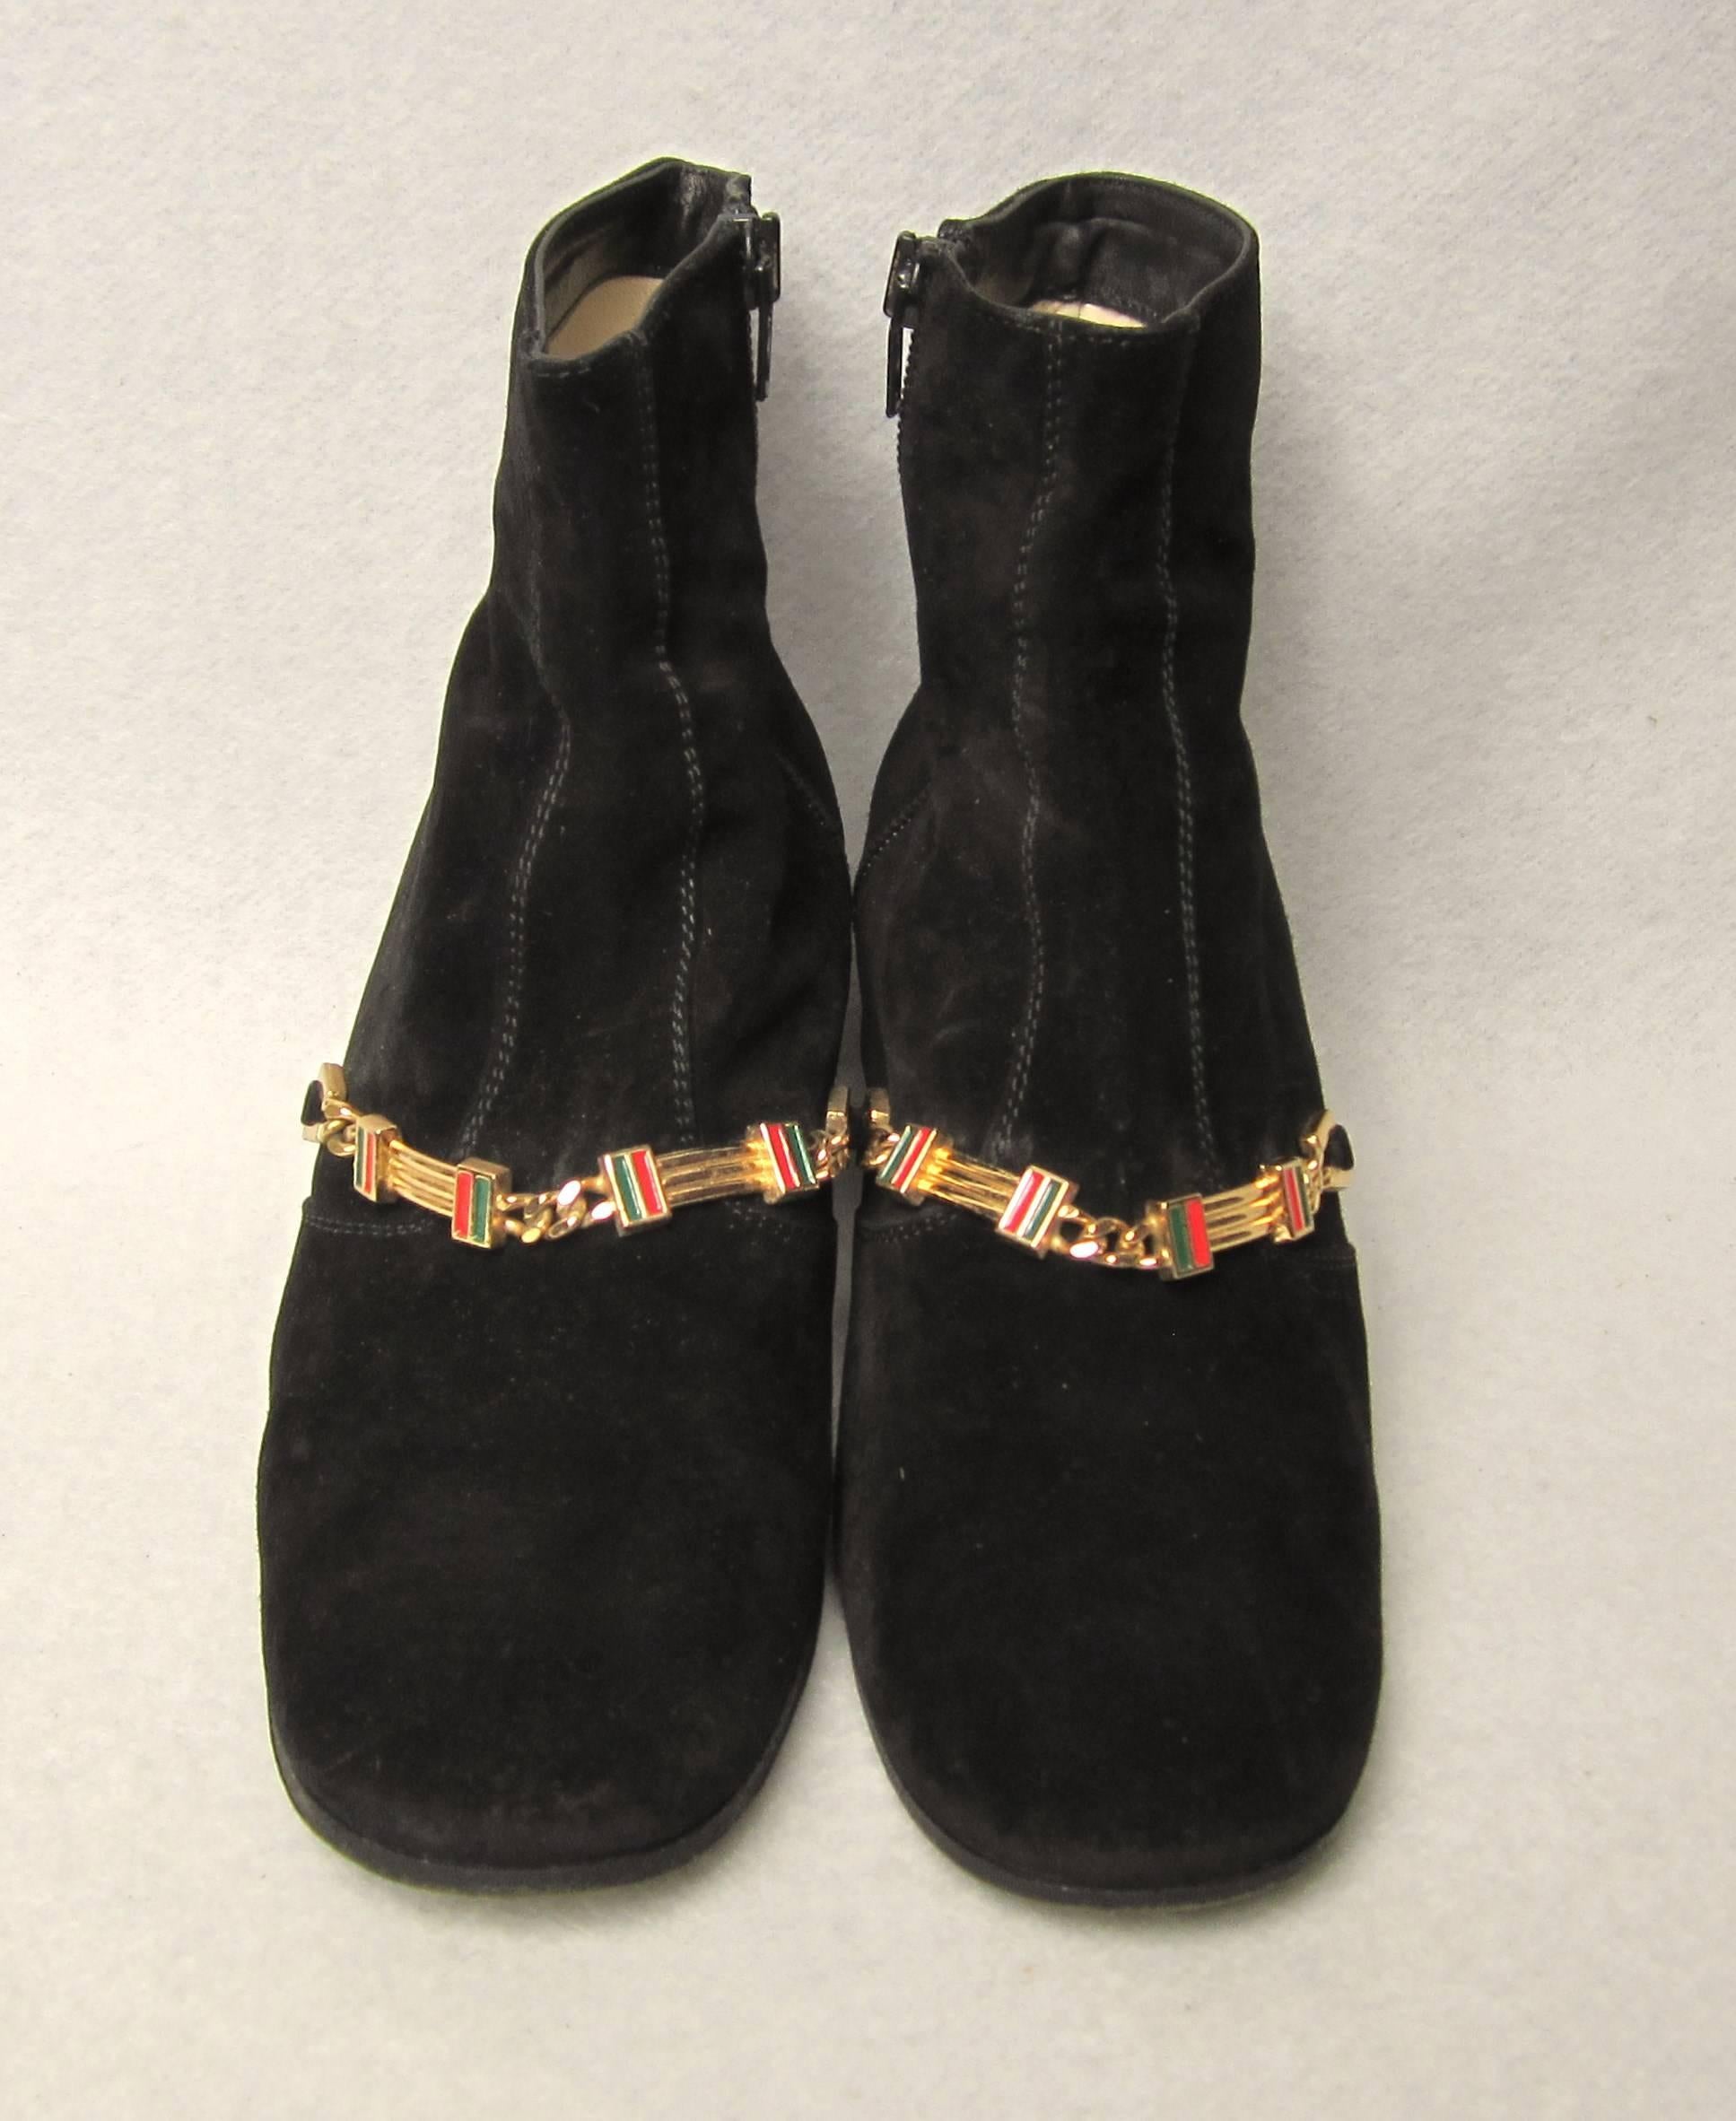 70s ankle boots